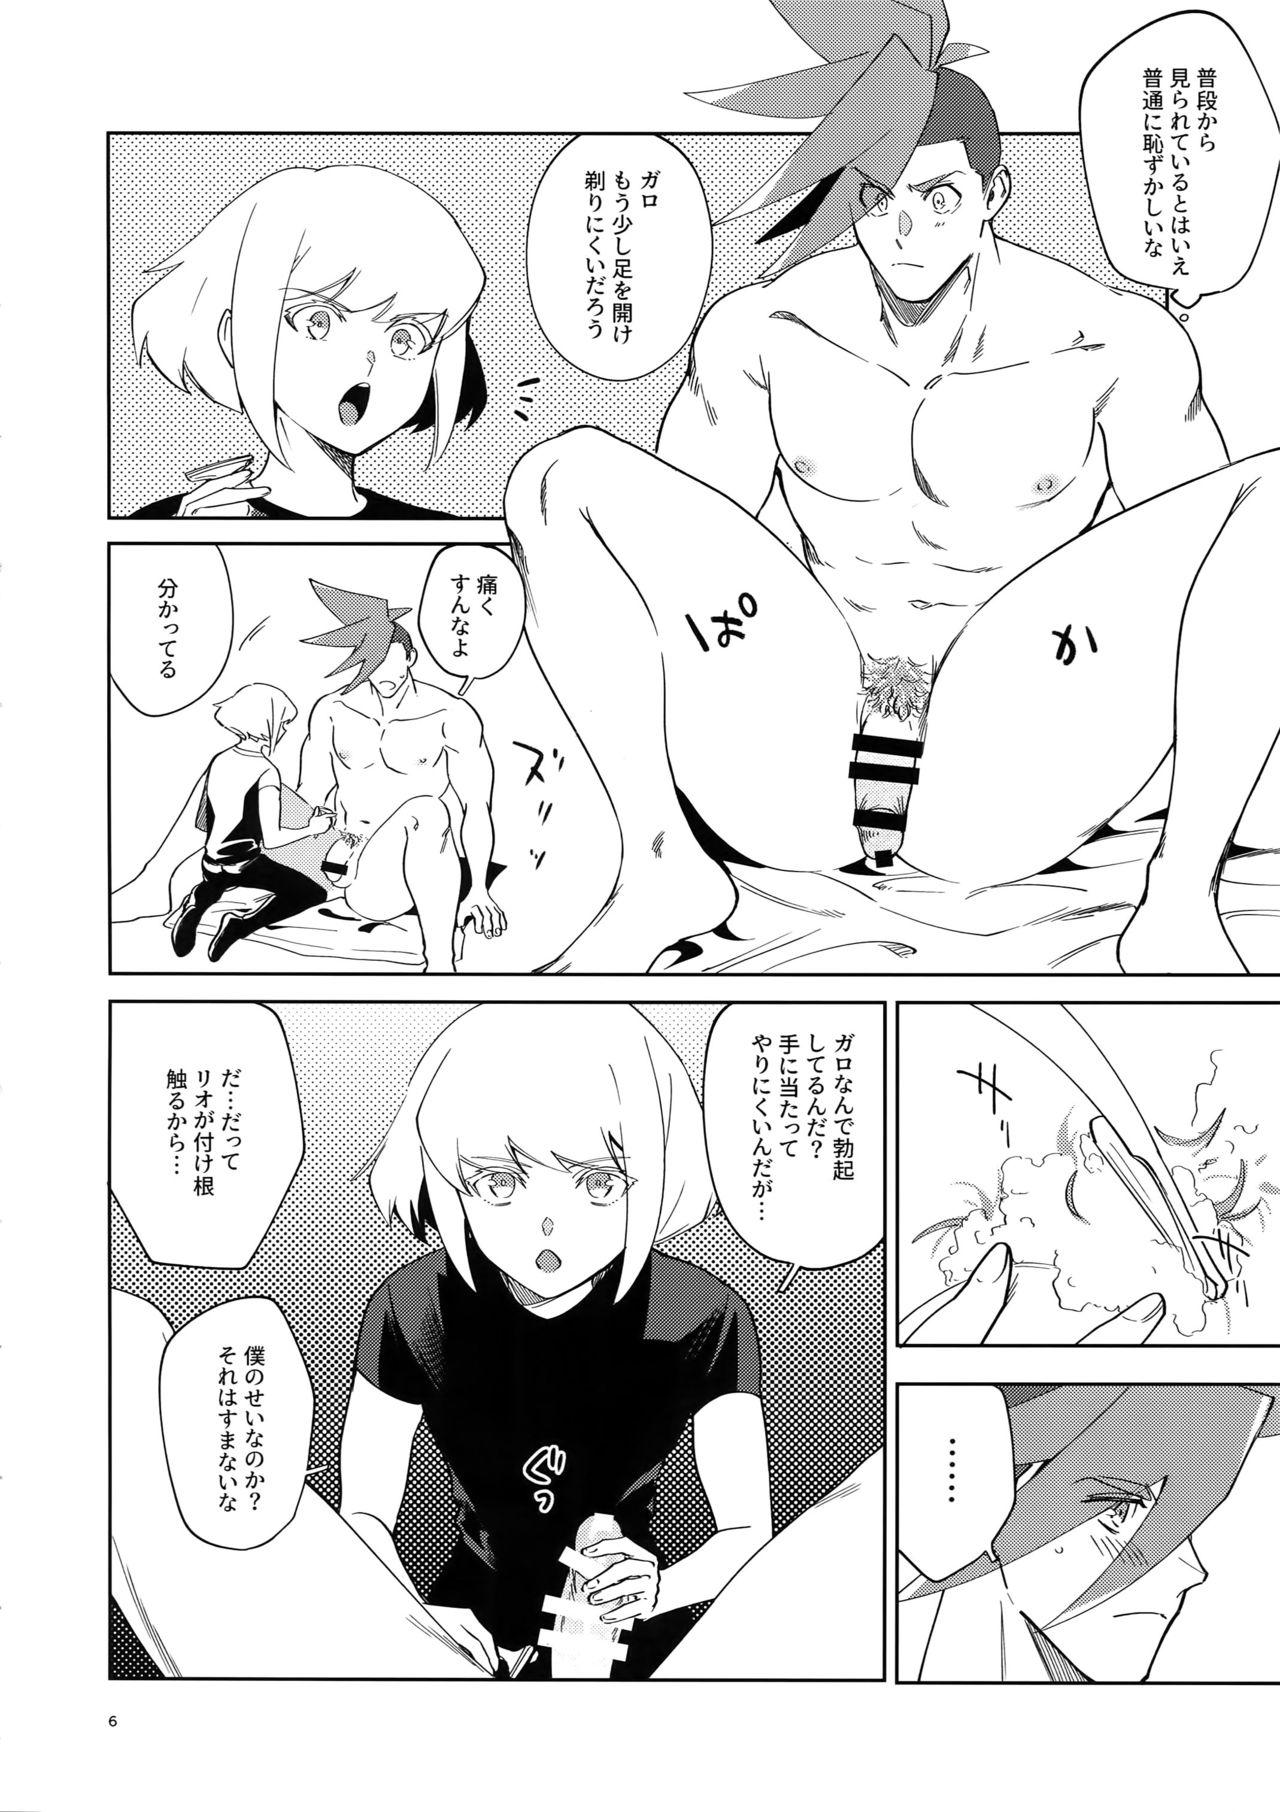 Free Blowjob One and Only - Promare Handjobs - Page 5